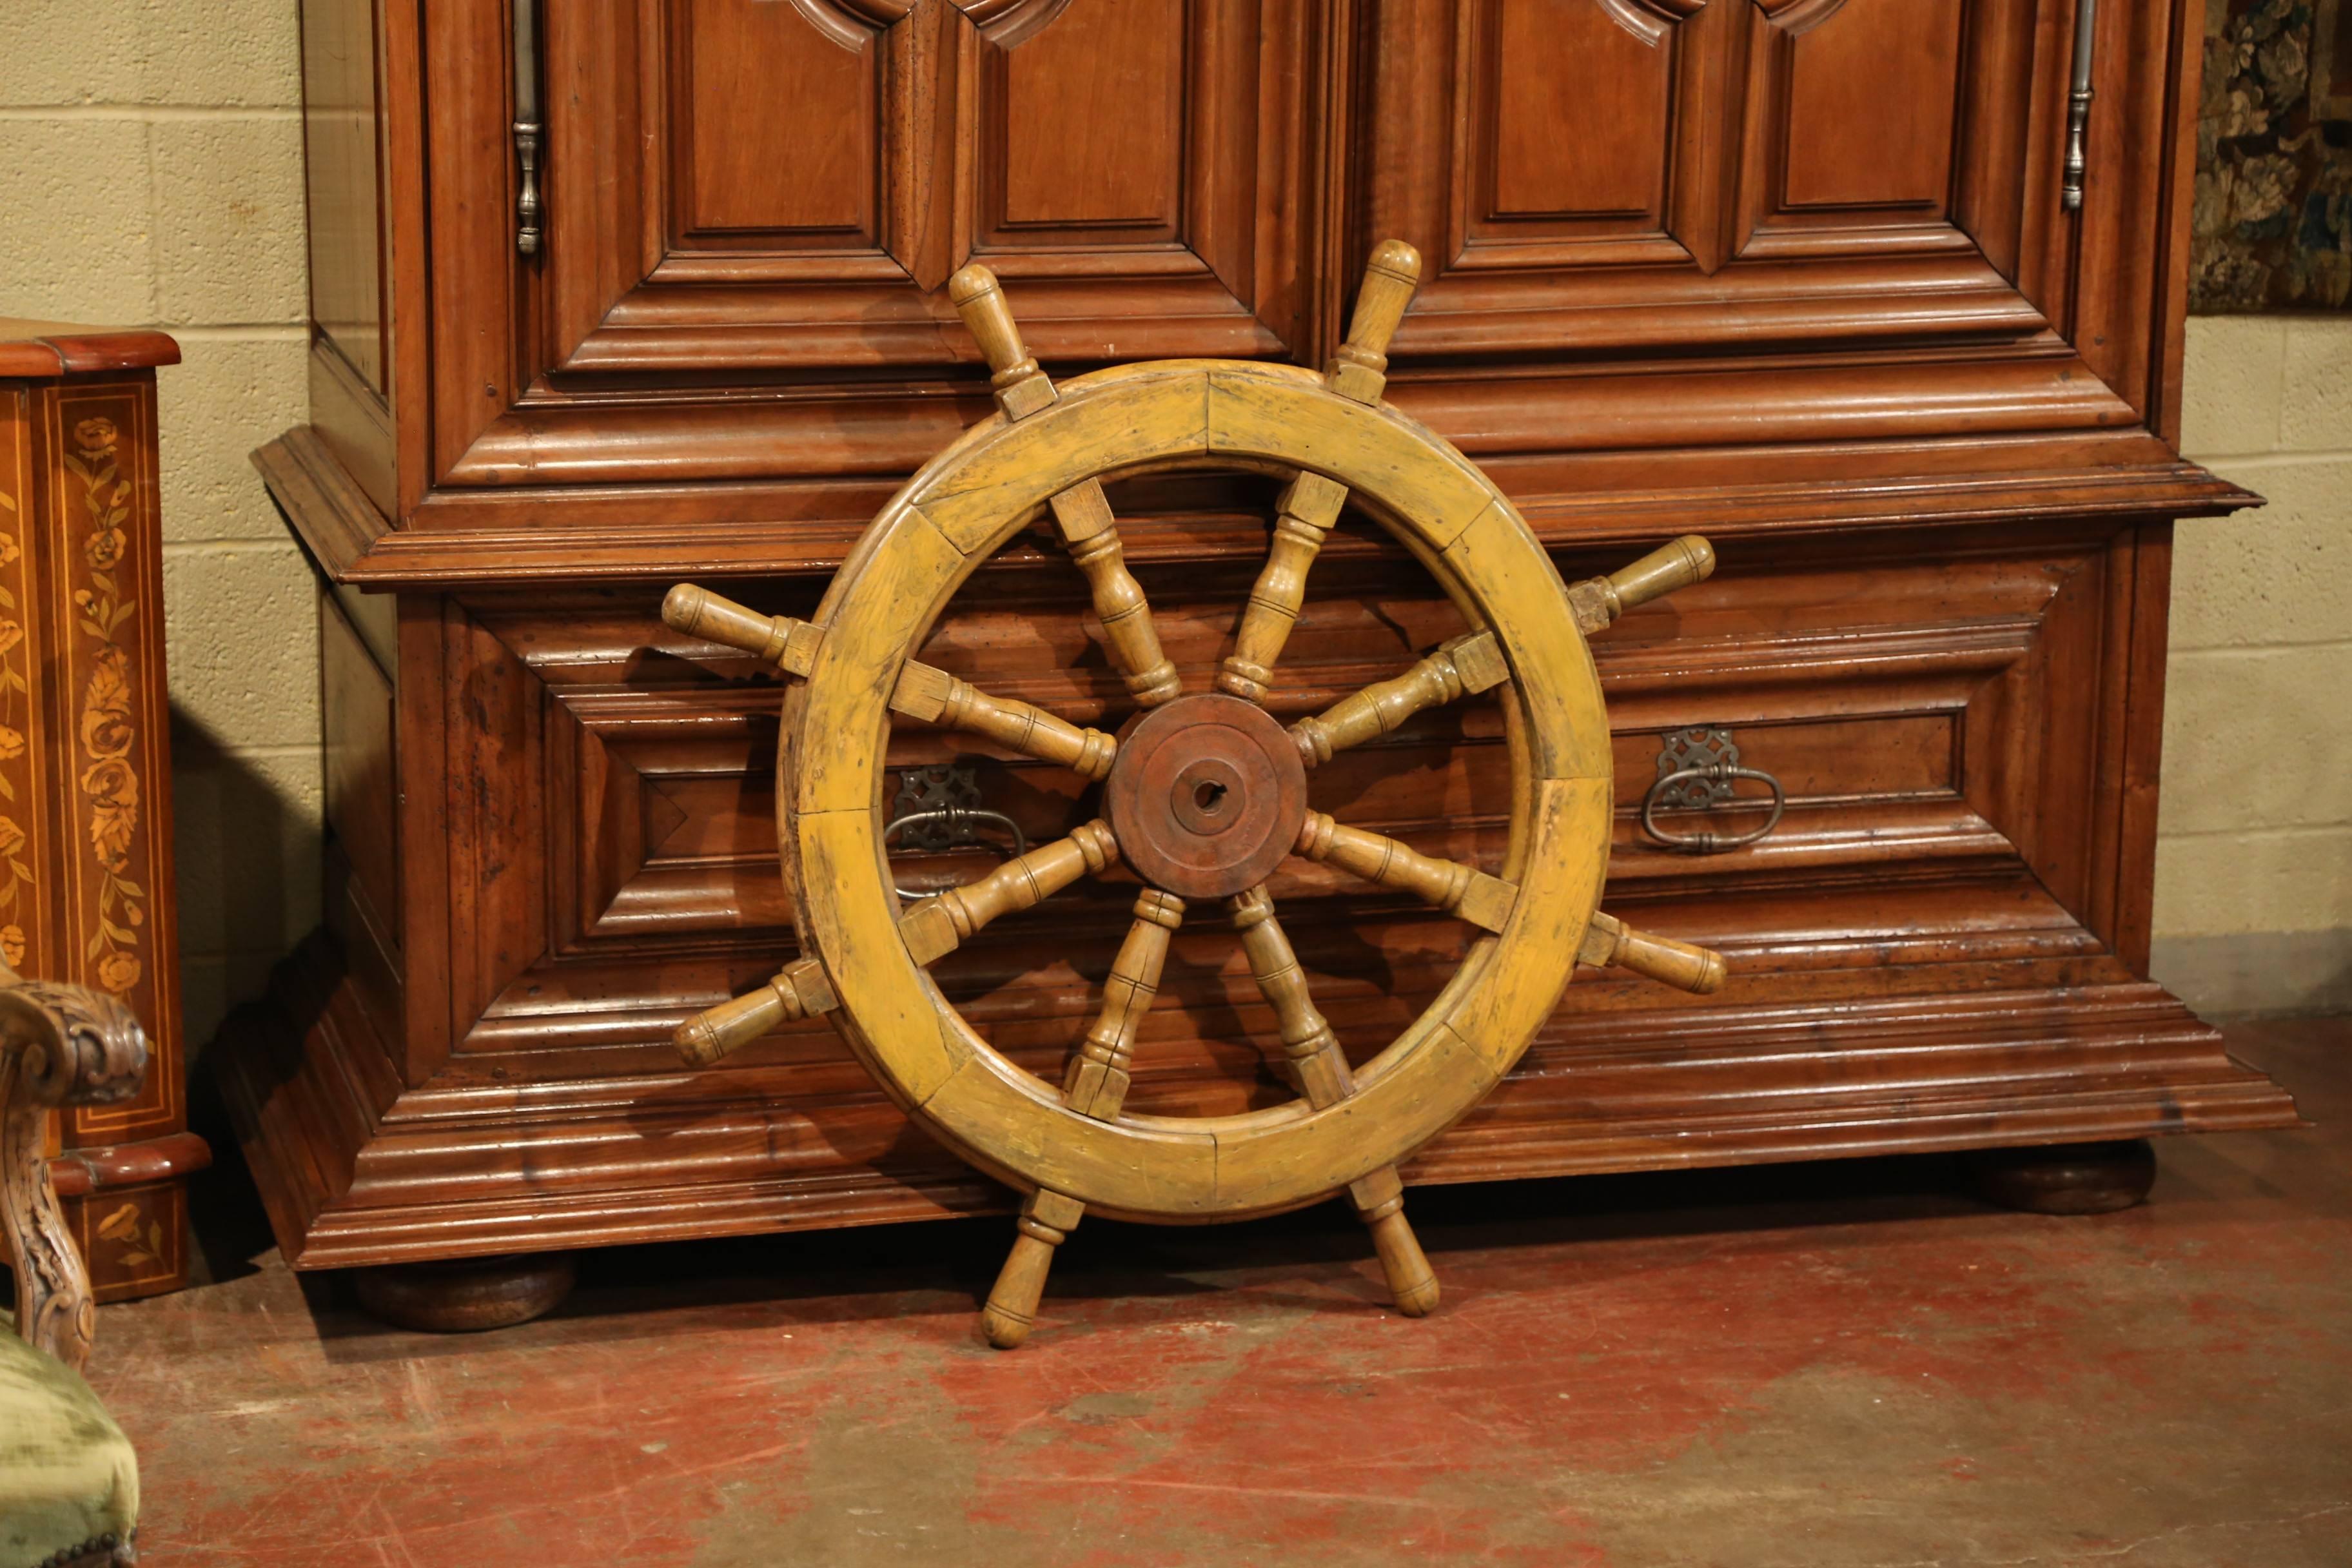 This large antique wooden ship wheel was carved in France, circa 1880. The traditional, fruitwood nautical object has its original metal brace around eight turned spindles with handles. The traditional marine accessory is in excellent condition with